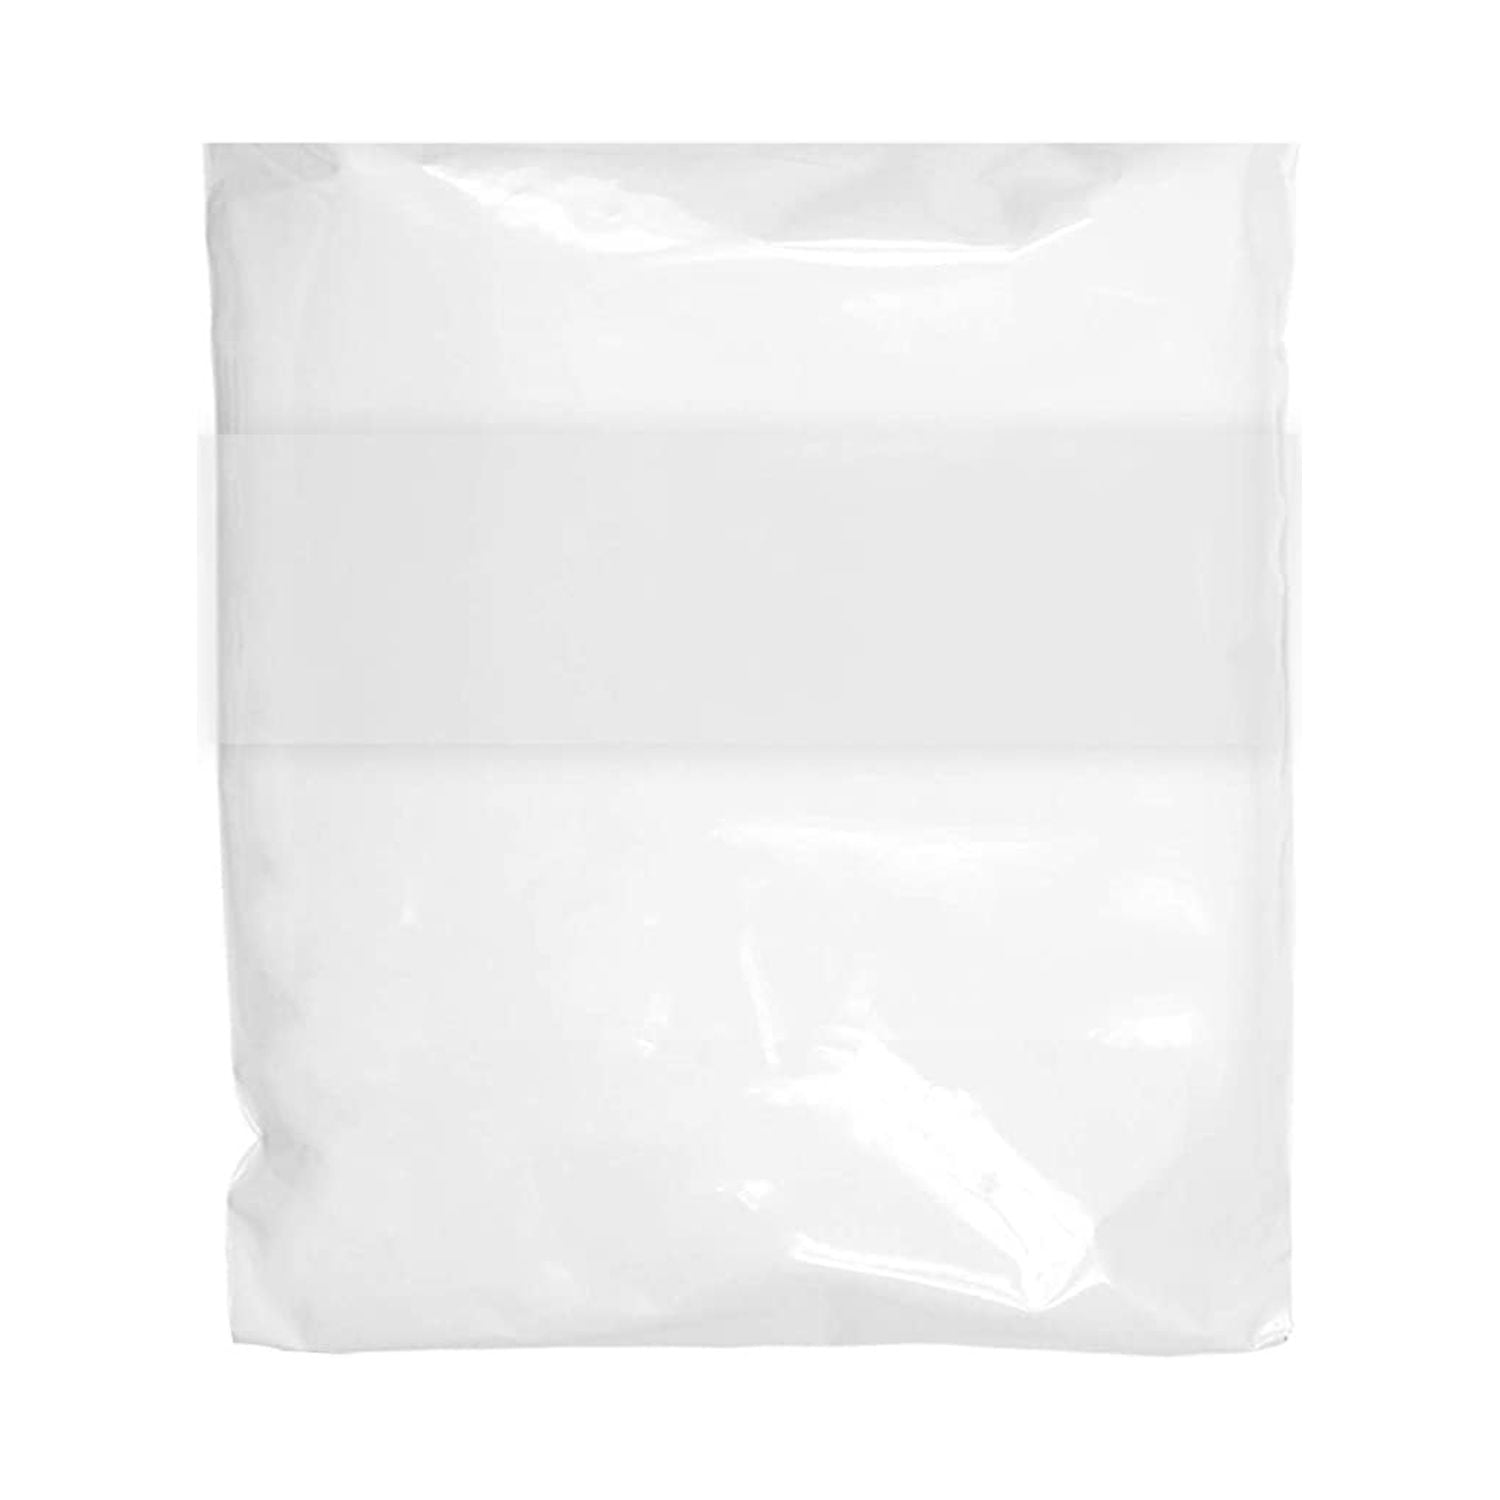 PUREVACY Flip and Fold Top Sandwich Bags 6.75 x 6.75; Polyethylene Clear  Bags for Packaging Pack of 2000; Disposable Food Storage Bags 0.36 Mil;  Fold